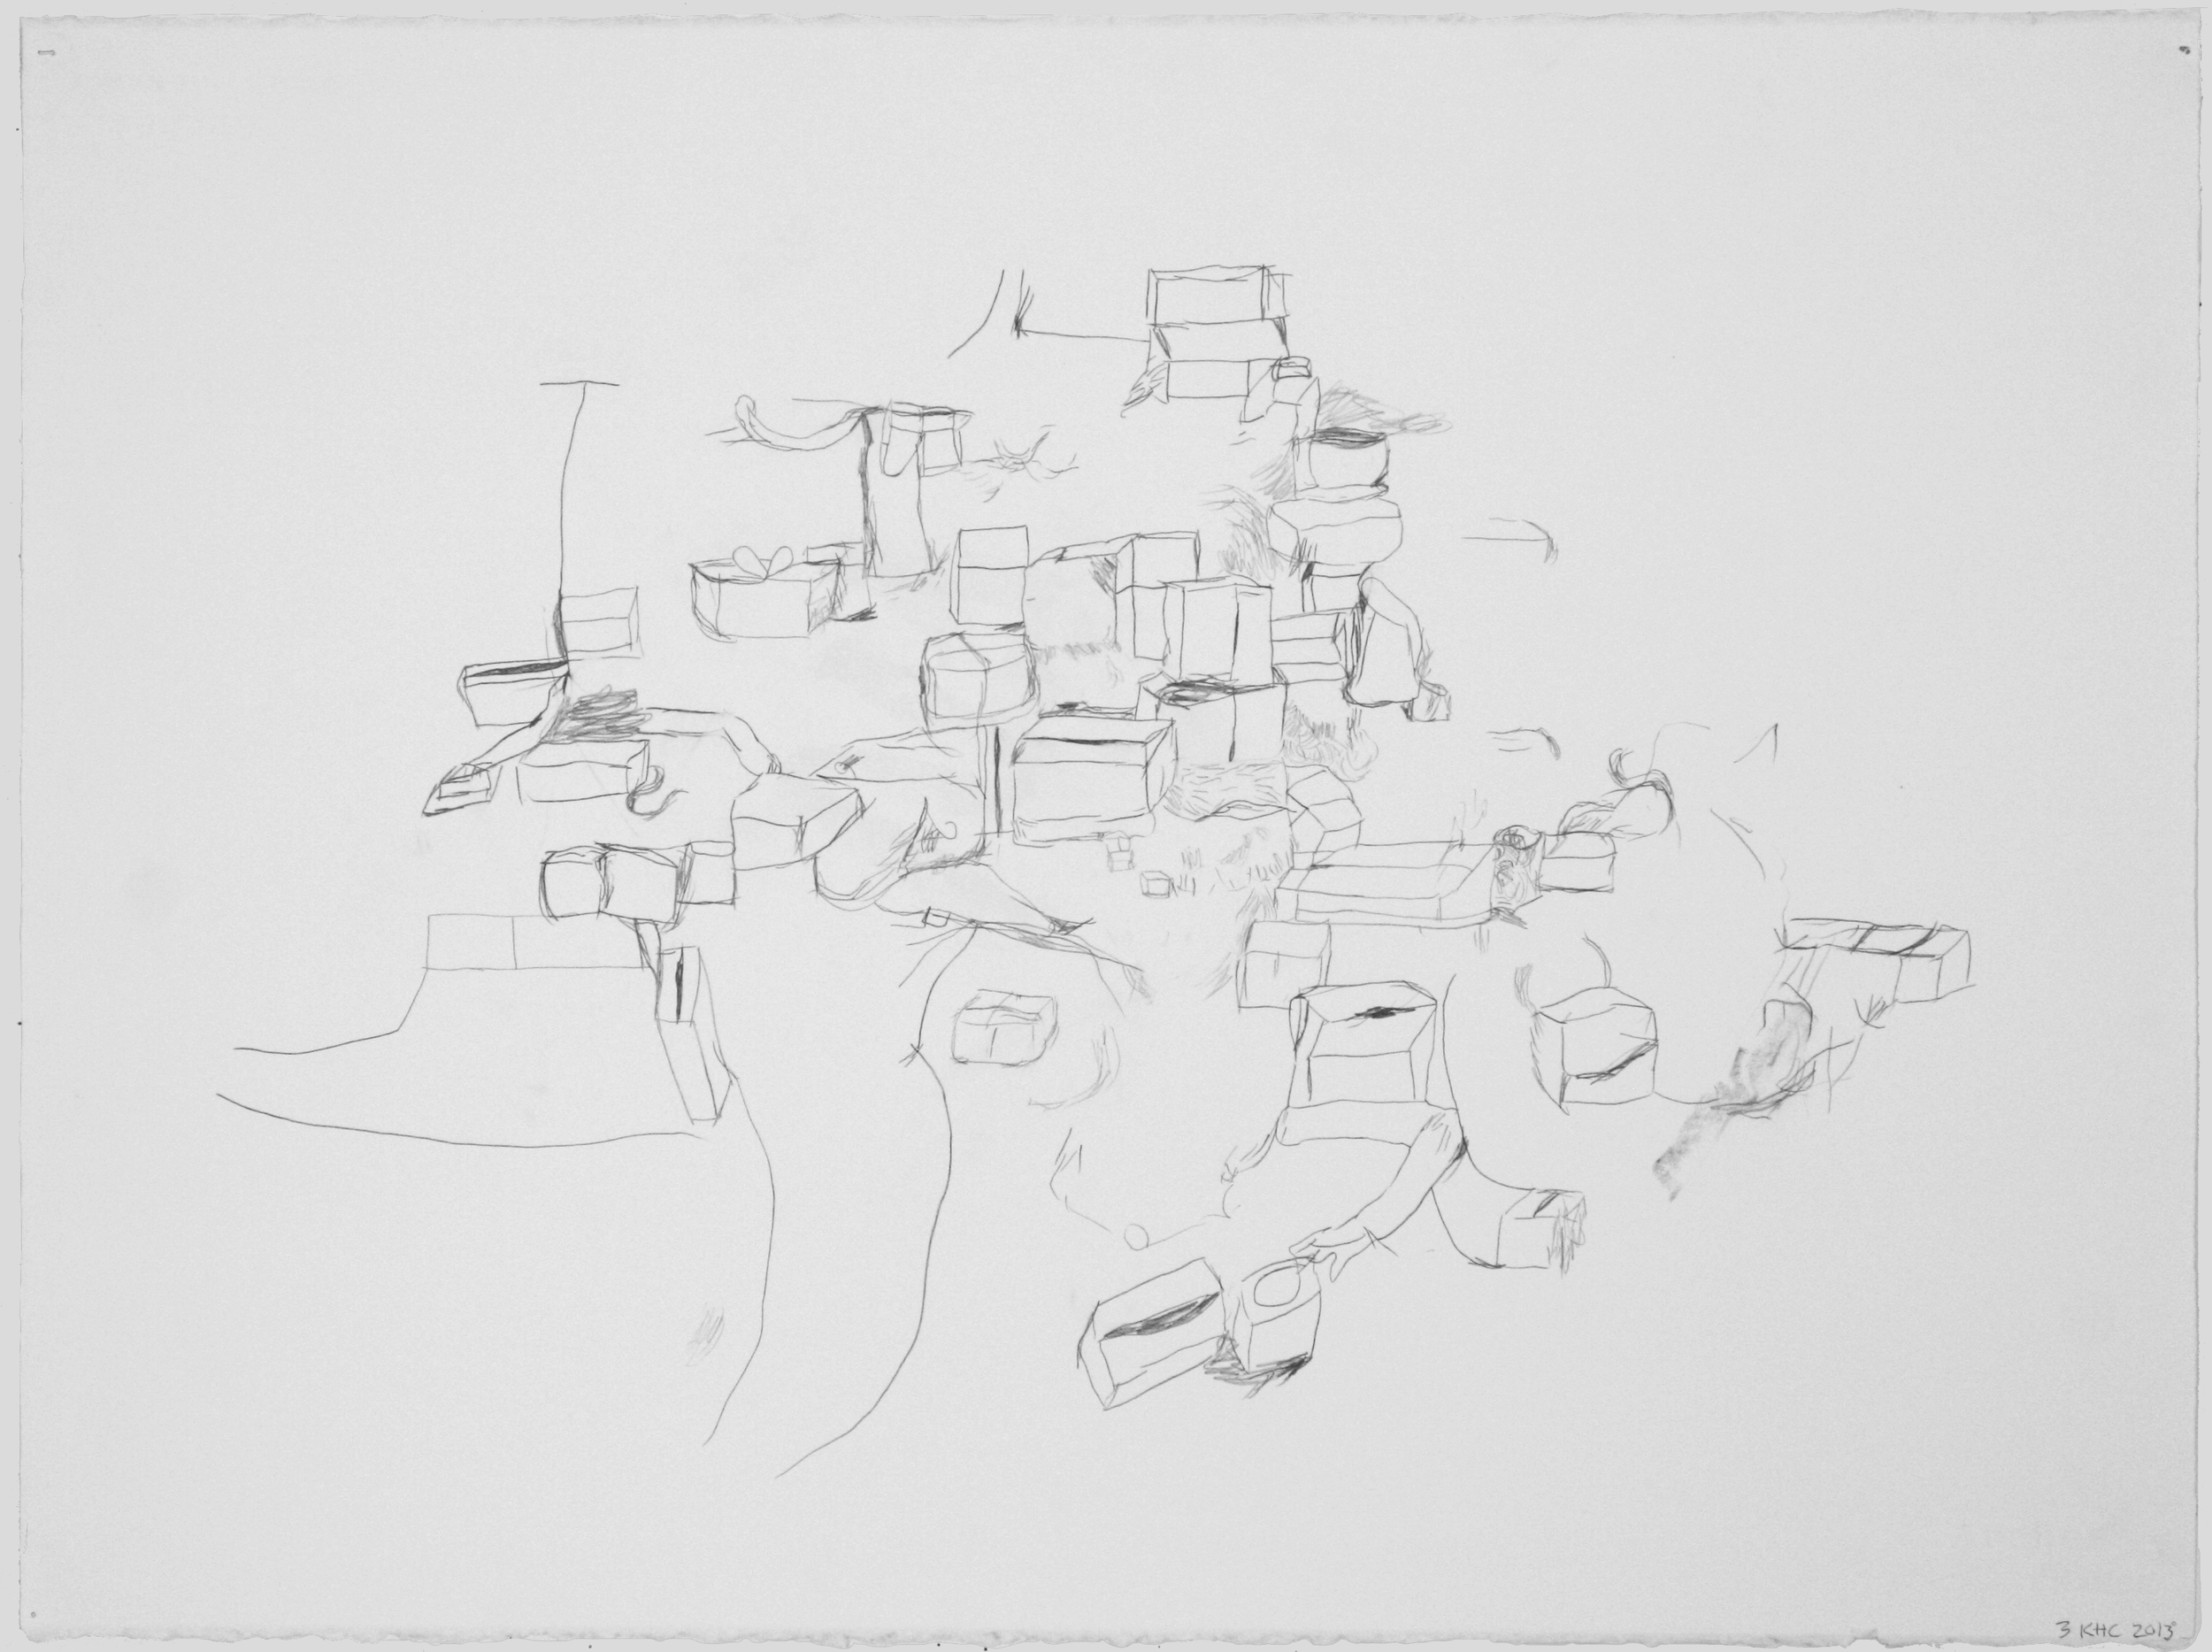  Untitled, 2013. 22" x 30", pencil on paper.  